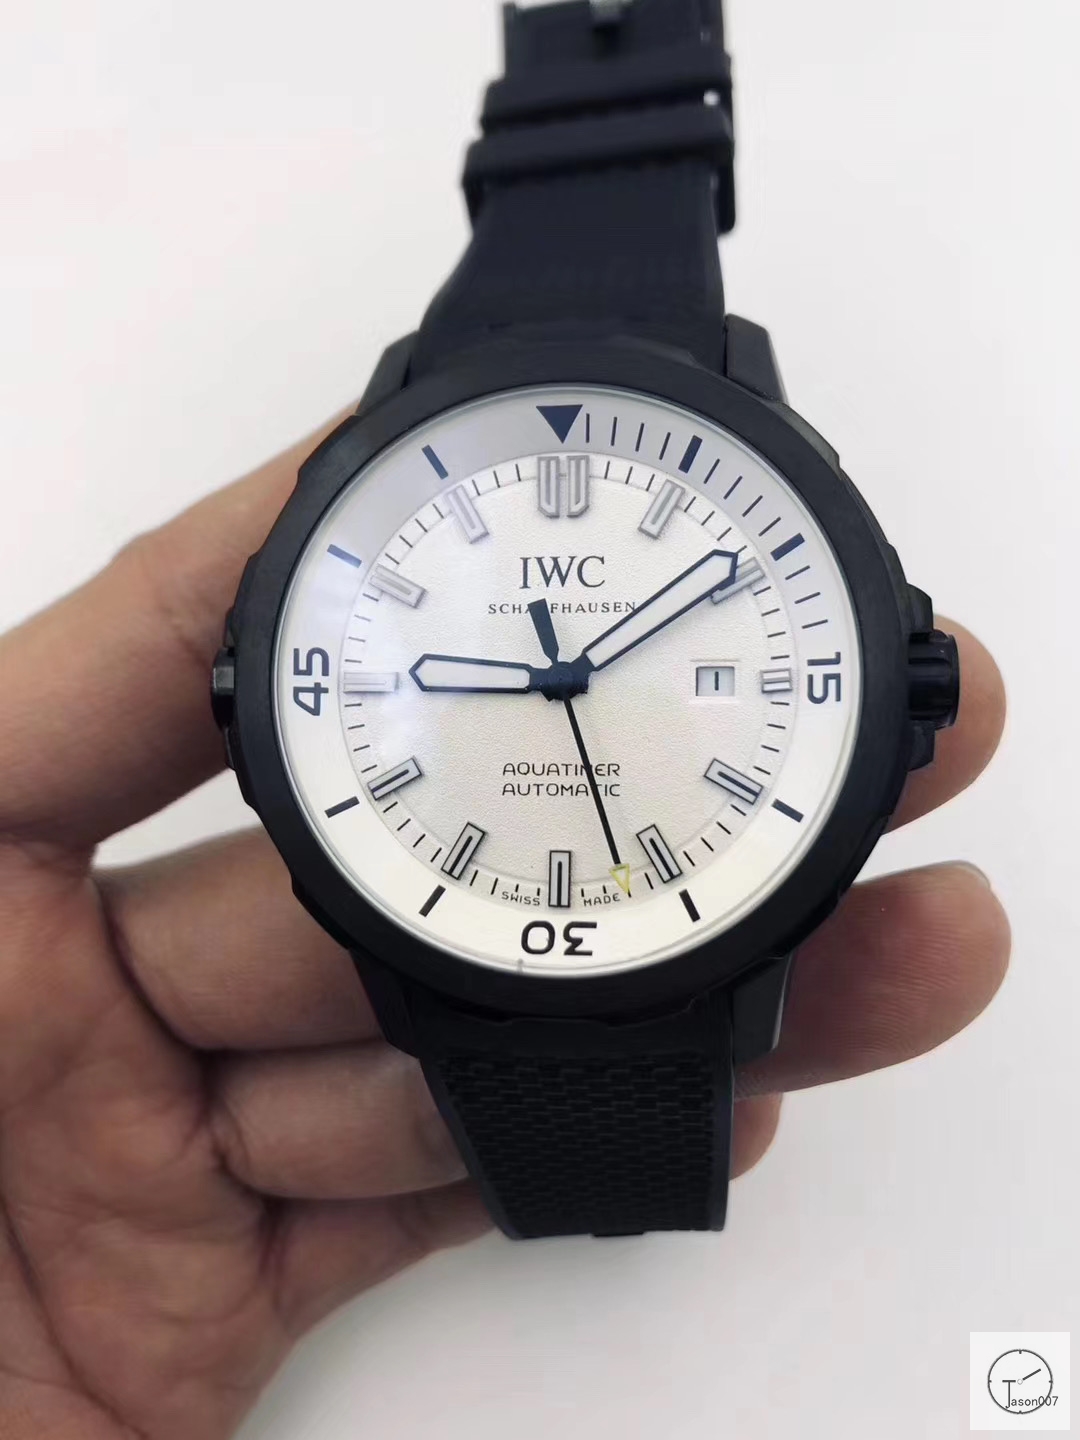 IWC AQUATIMER AUTOMATIC Mechical IW329001 42MM BLACK DIAL PVD Case Rubber Strap Mens Wristwatches ICW22030560